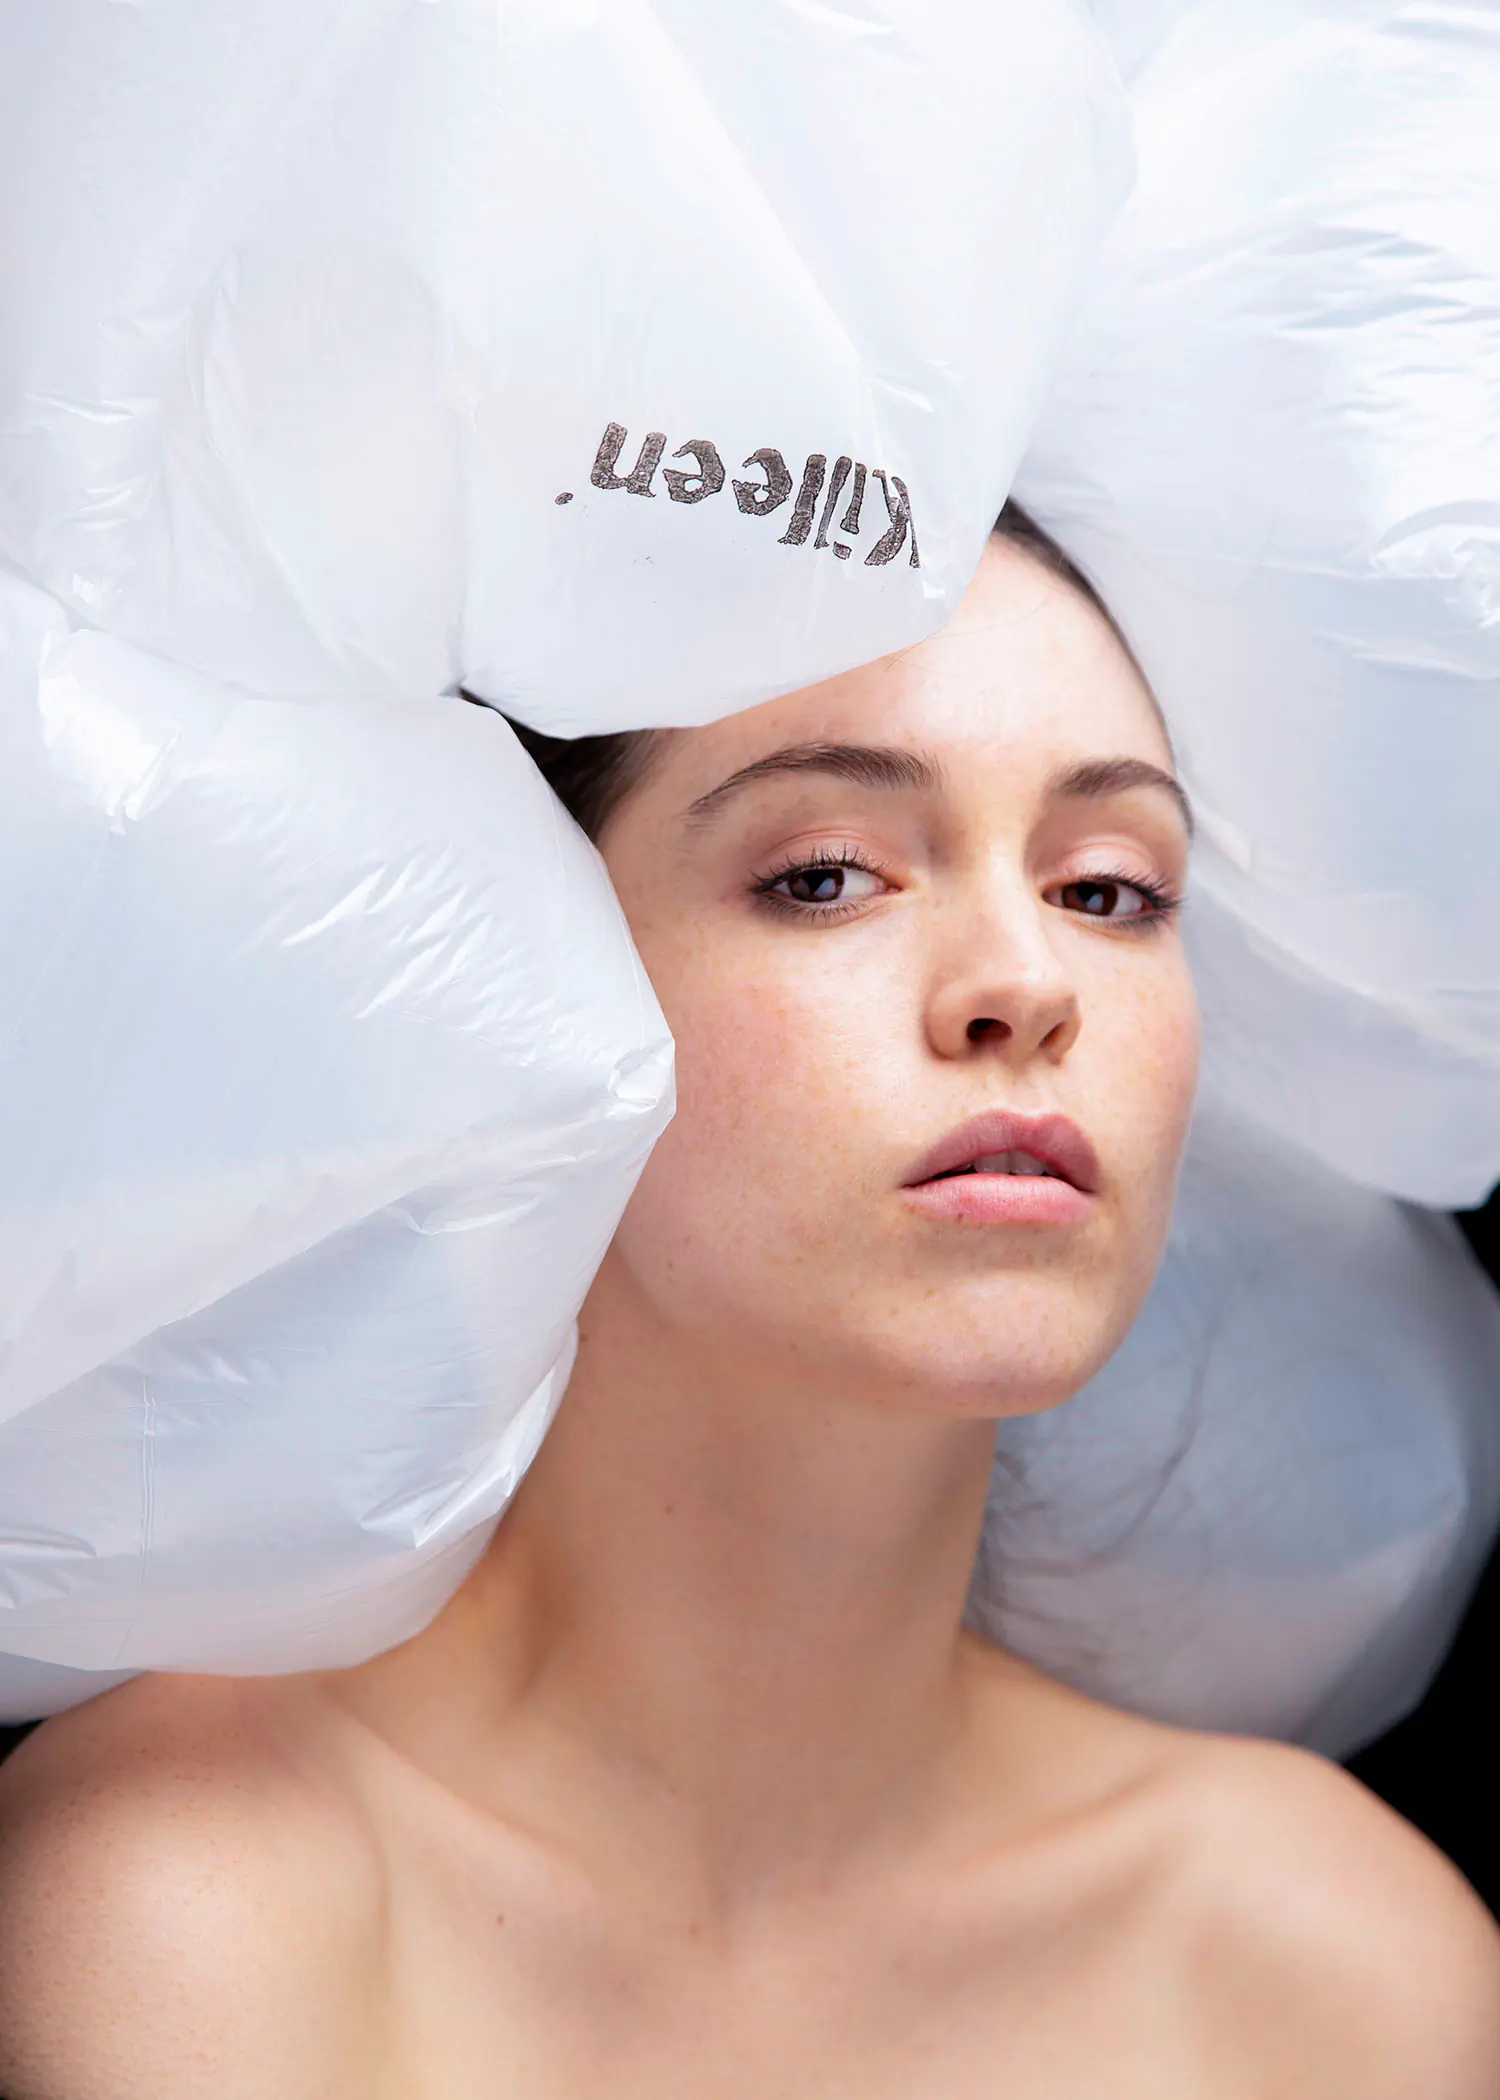 Single-use plastic bags as headpiece on a young woman